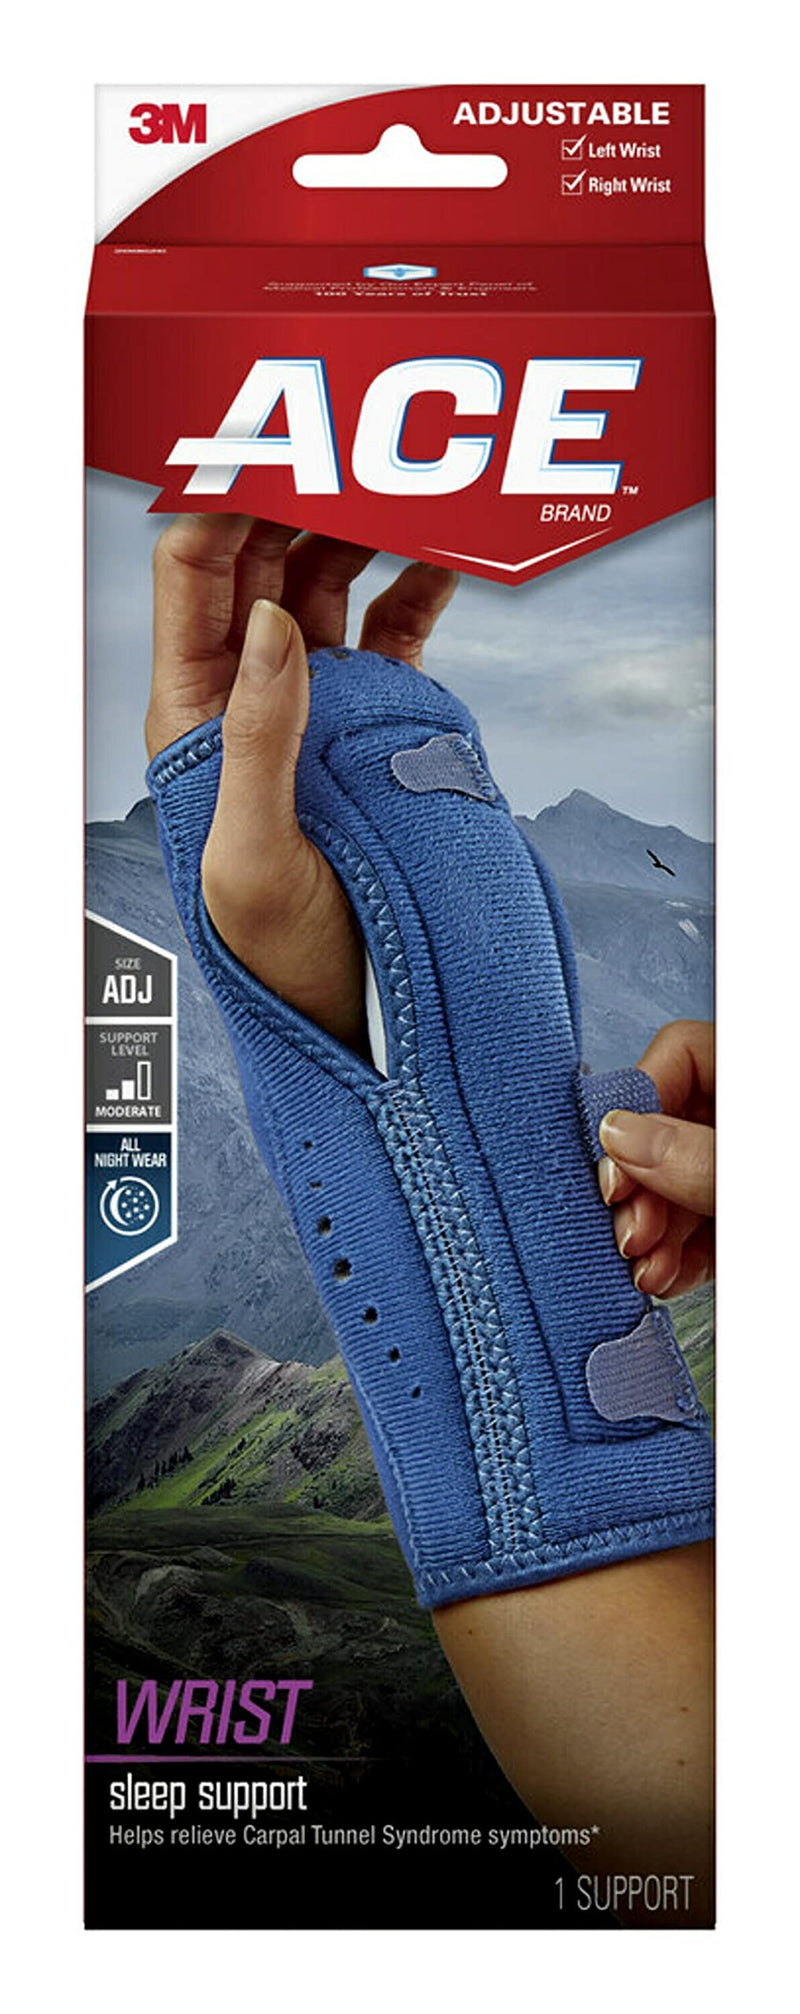 [Australia] - ACE Night Wrist Sleep Support, Adjustable, Blue, Helps Provide Relief from Symptoms of Carpal Tunnel Syndrome, and other Wrist Injuries Night Wrist Support 